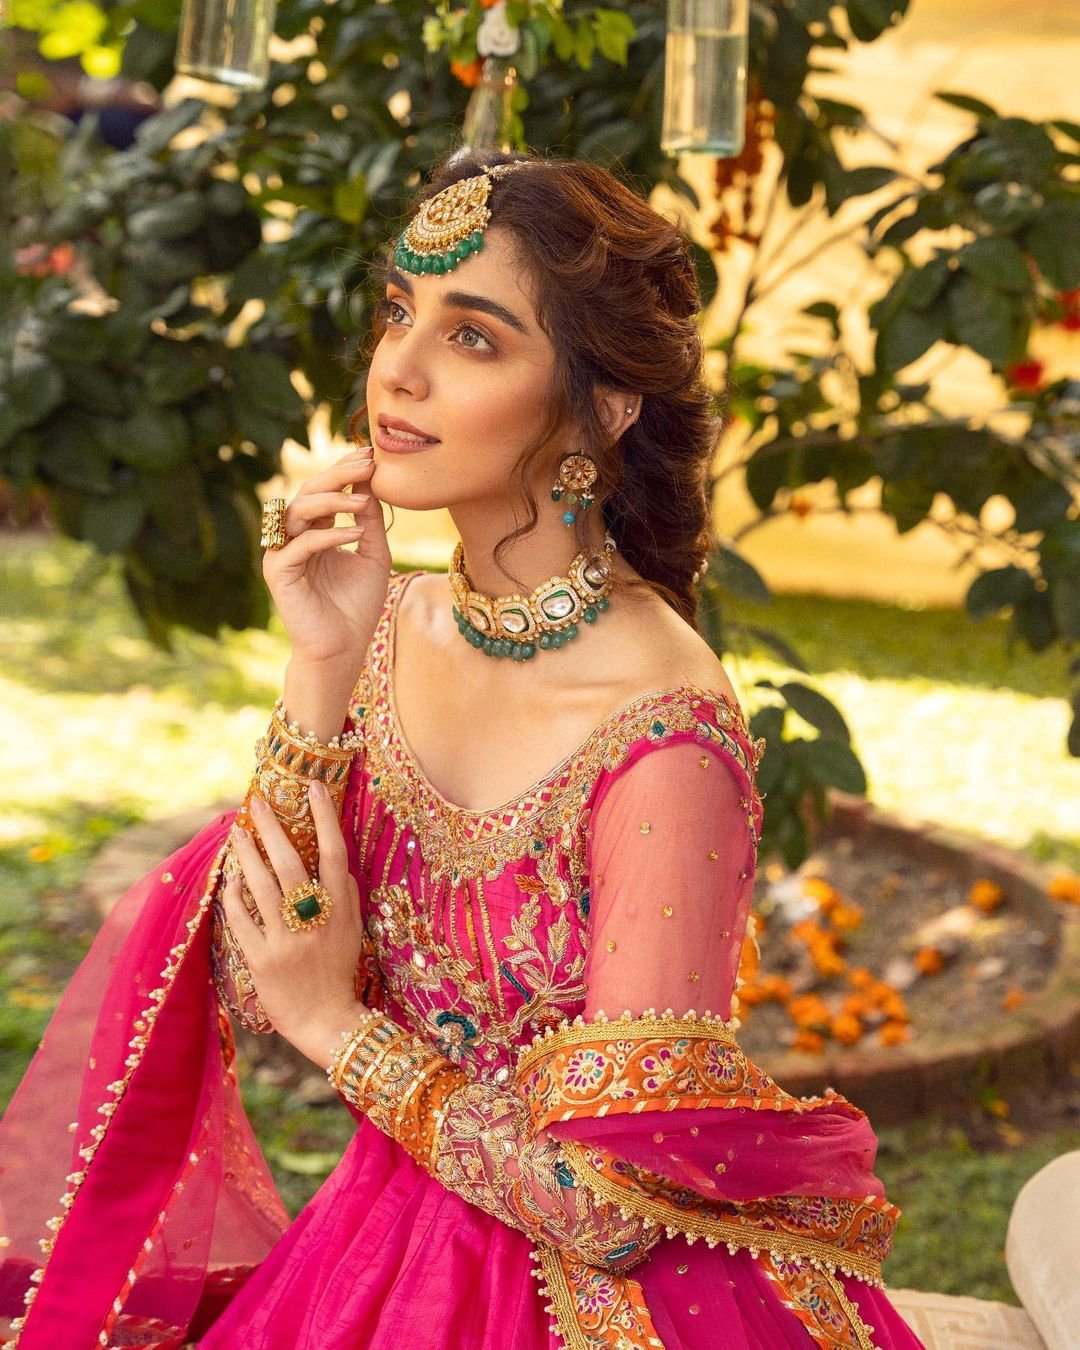 Maya Ali Enthralled in Deep Red Jora from Her Own Brand